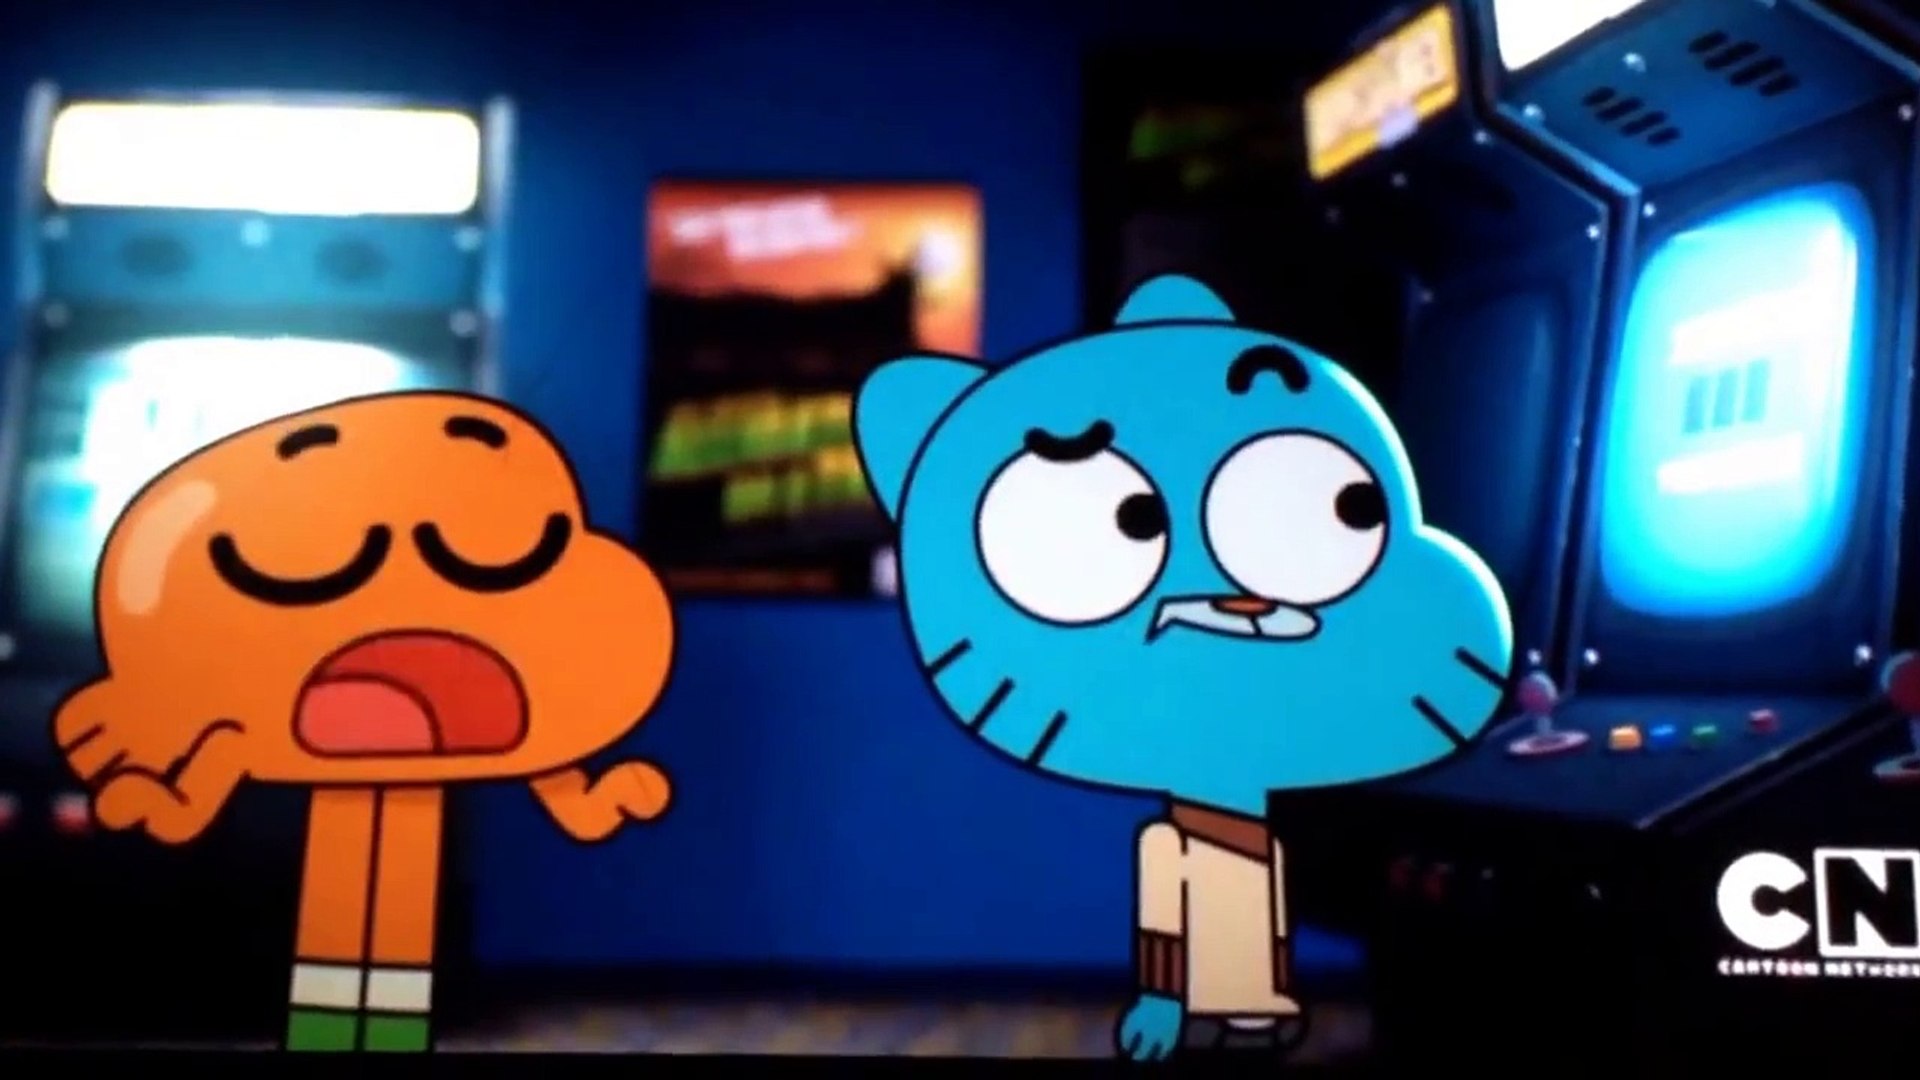 The amazing world of gumball is real!